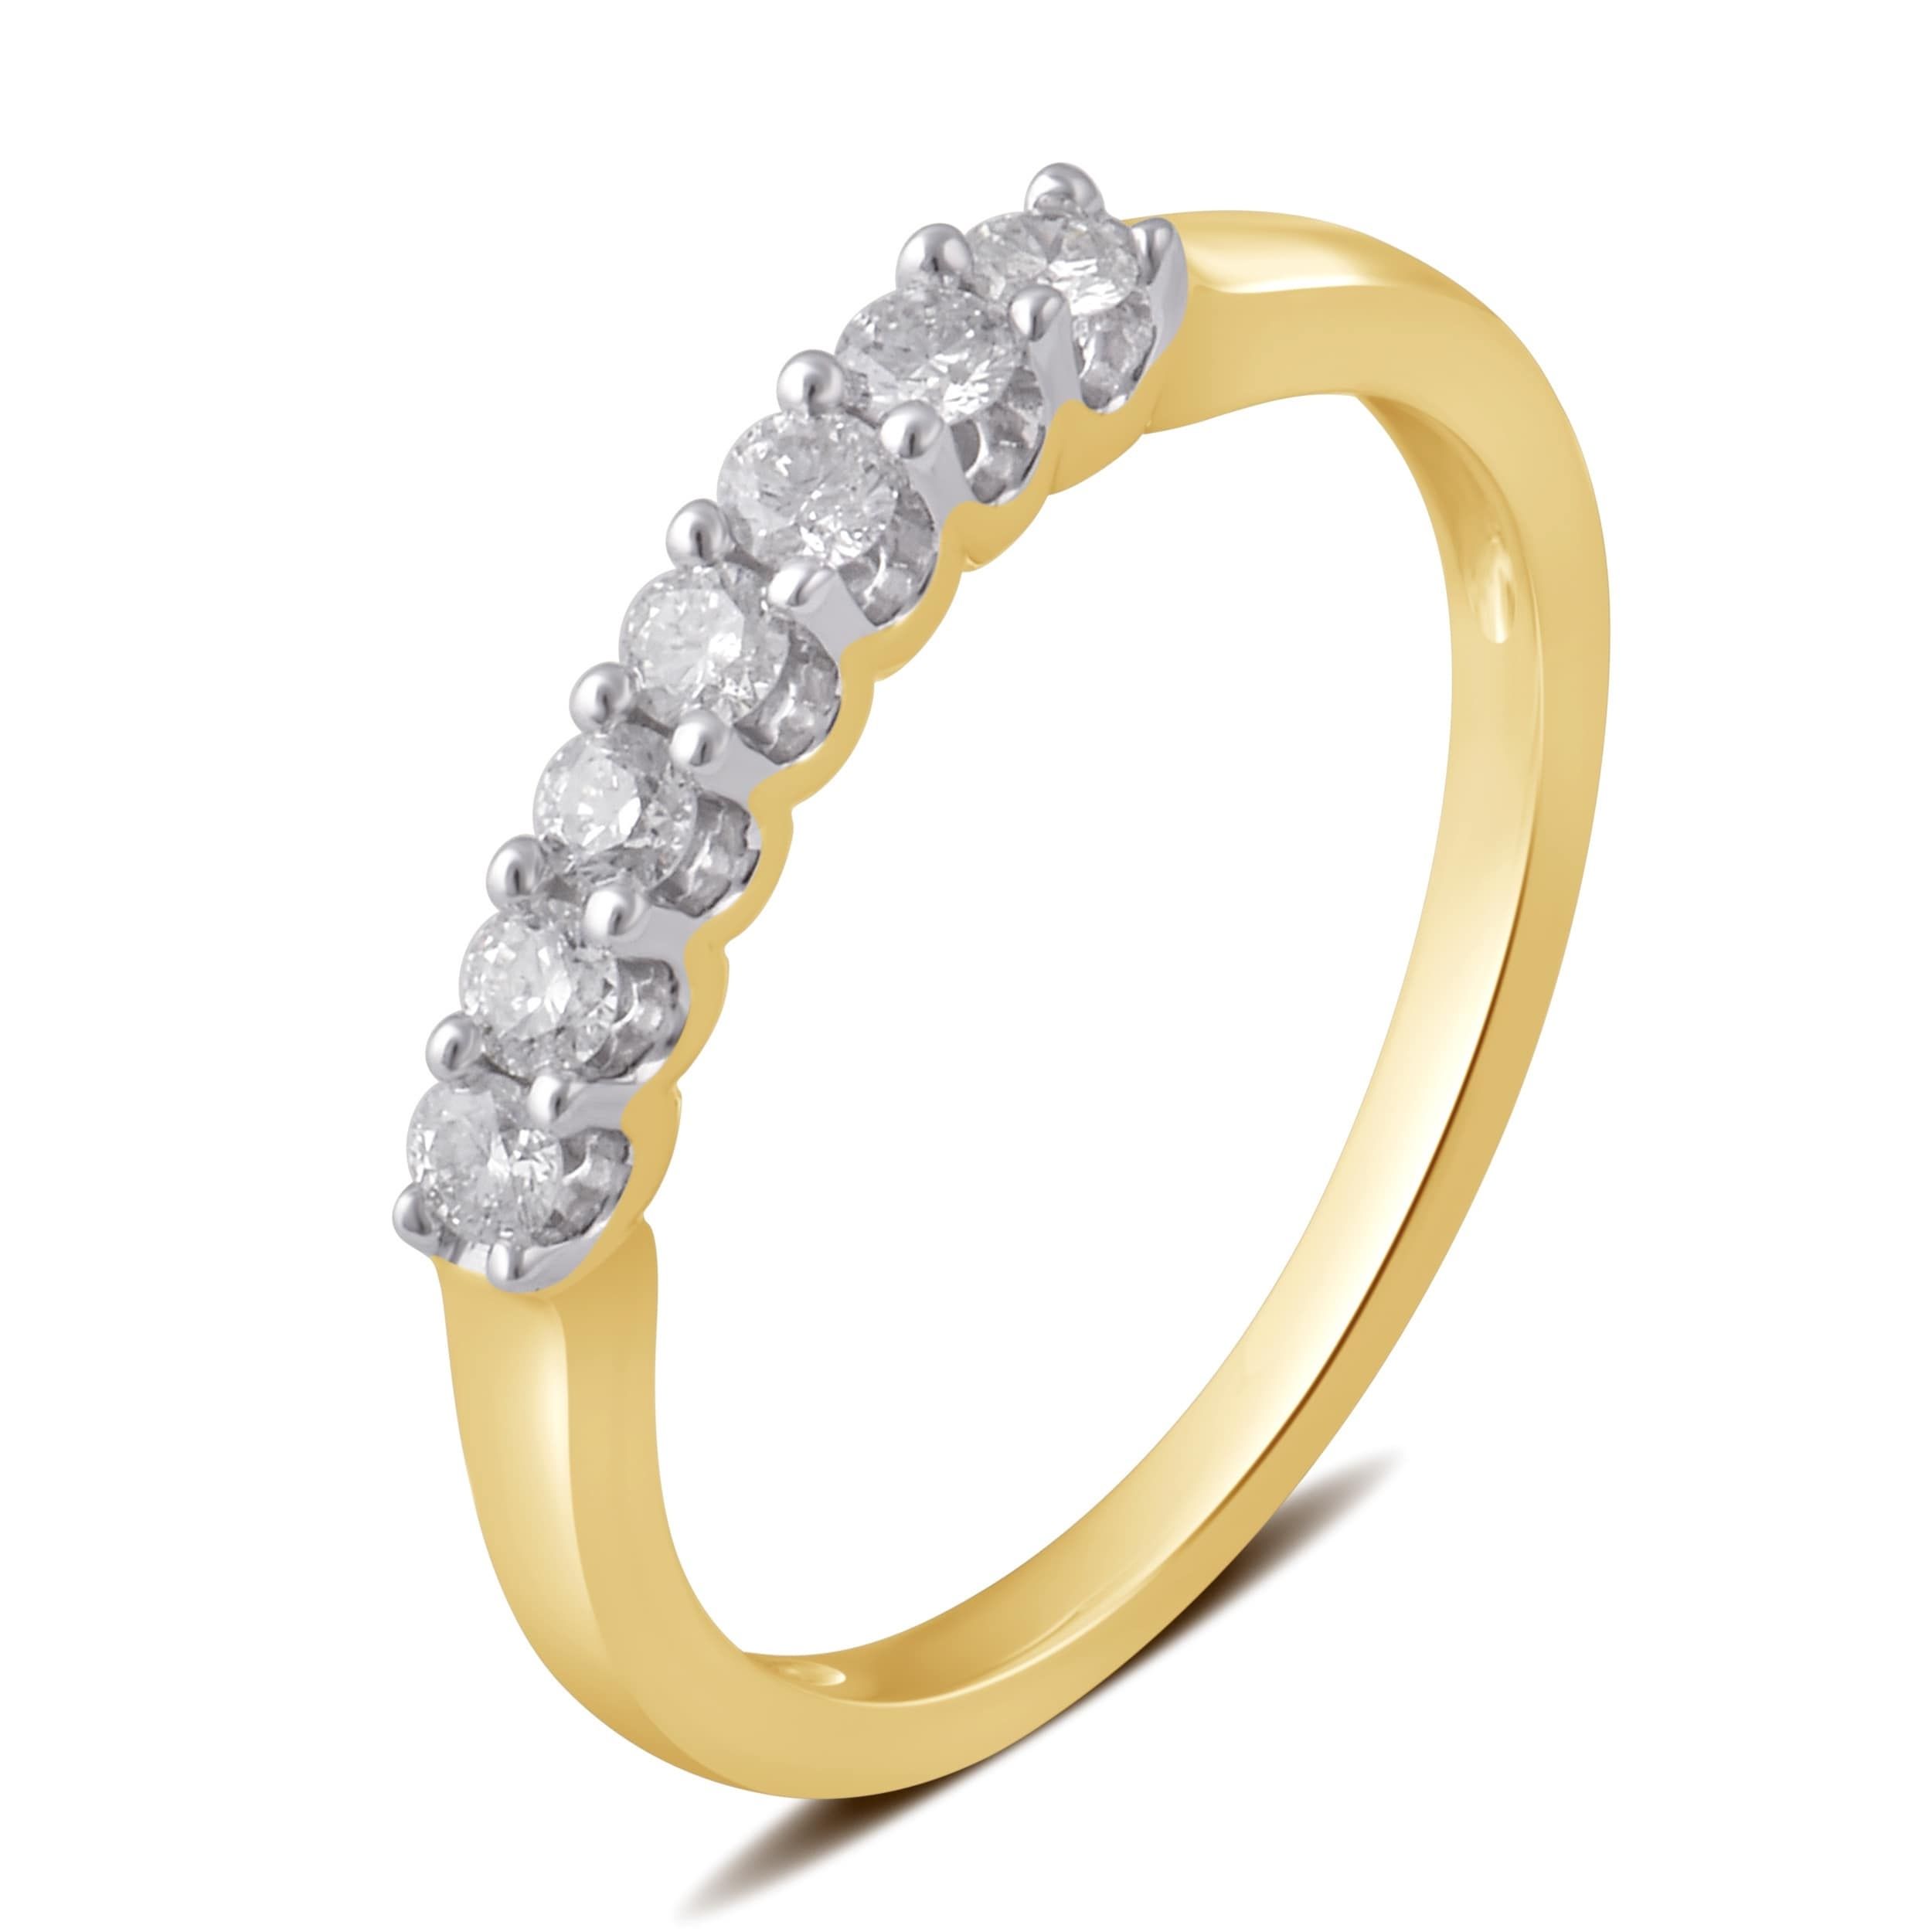 Shop Divina 10k White Or Yellow Gold 1/4ct Tdw Diamond 7 Stone With Regard To Latest Diamond Seven Stone Wedding Bands In 10k Two Tone Gold (View 2 of 15)